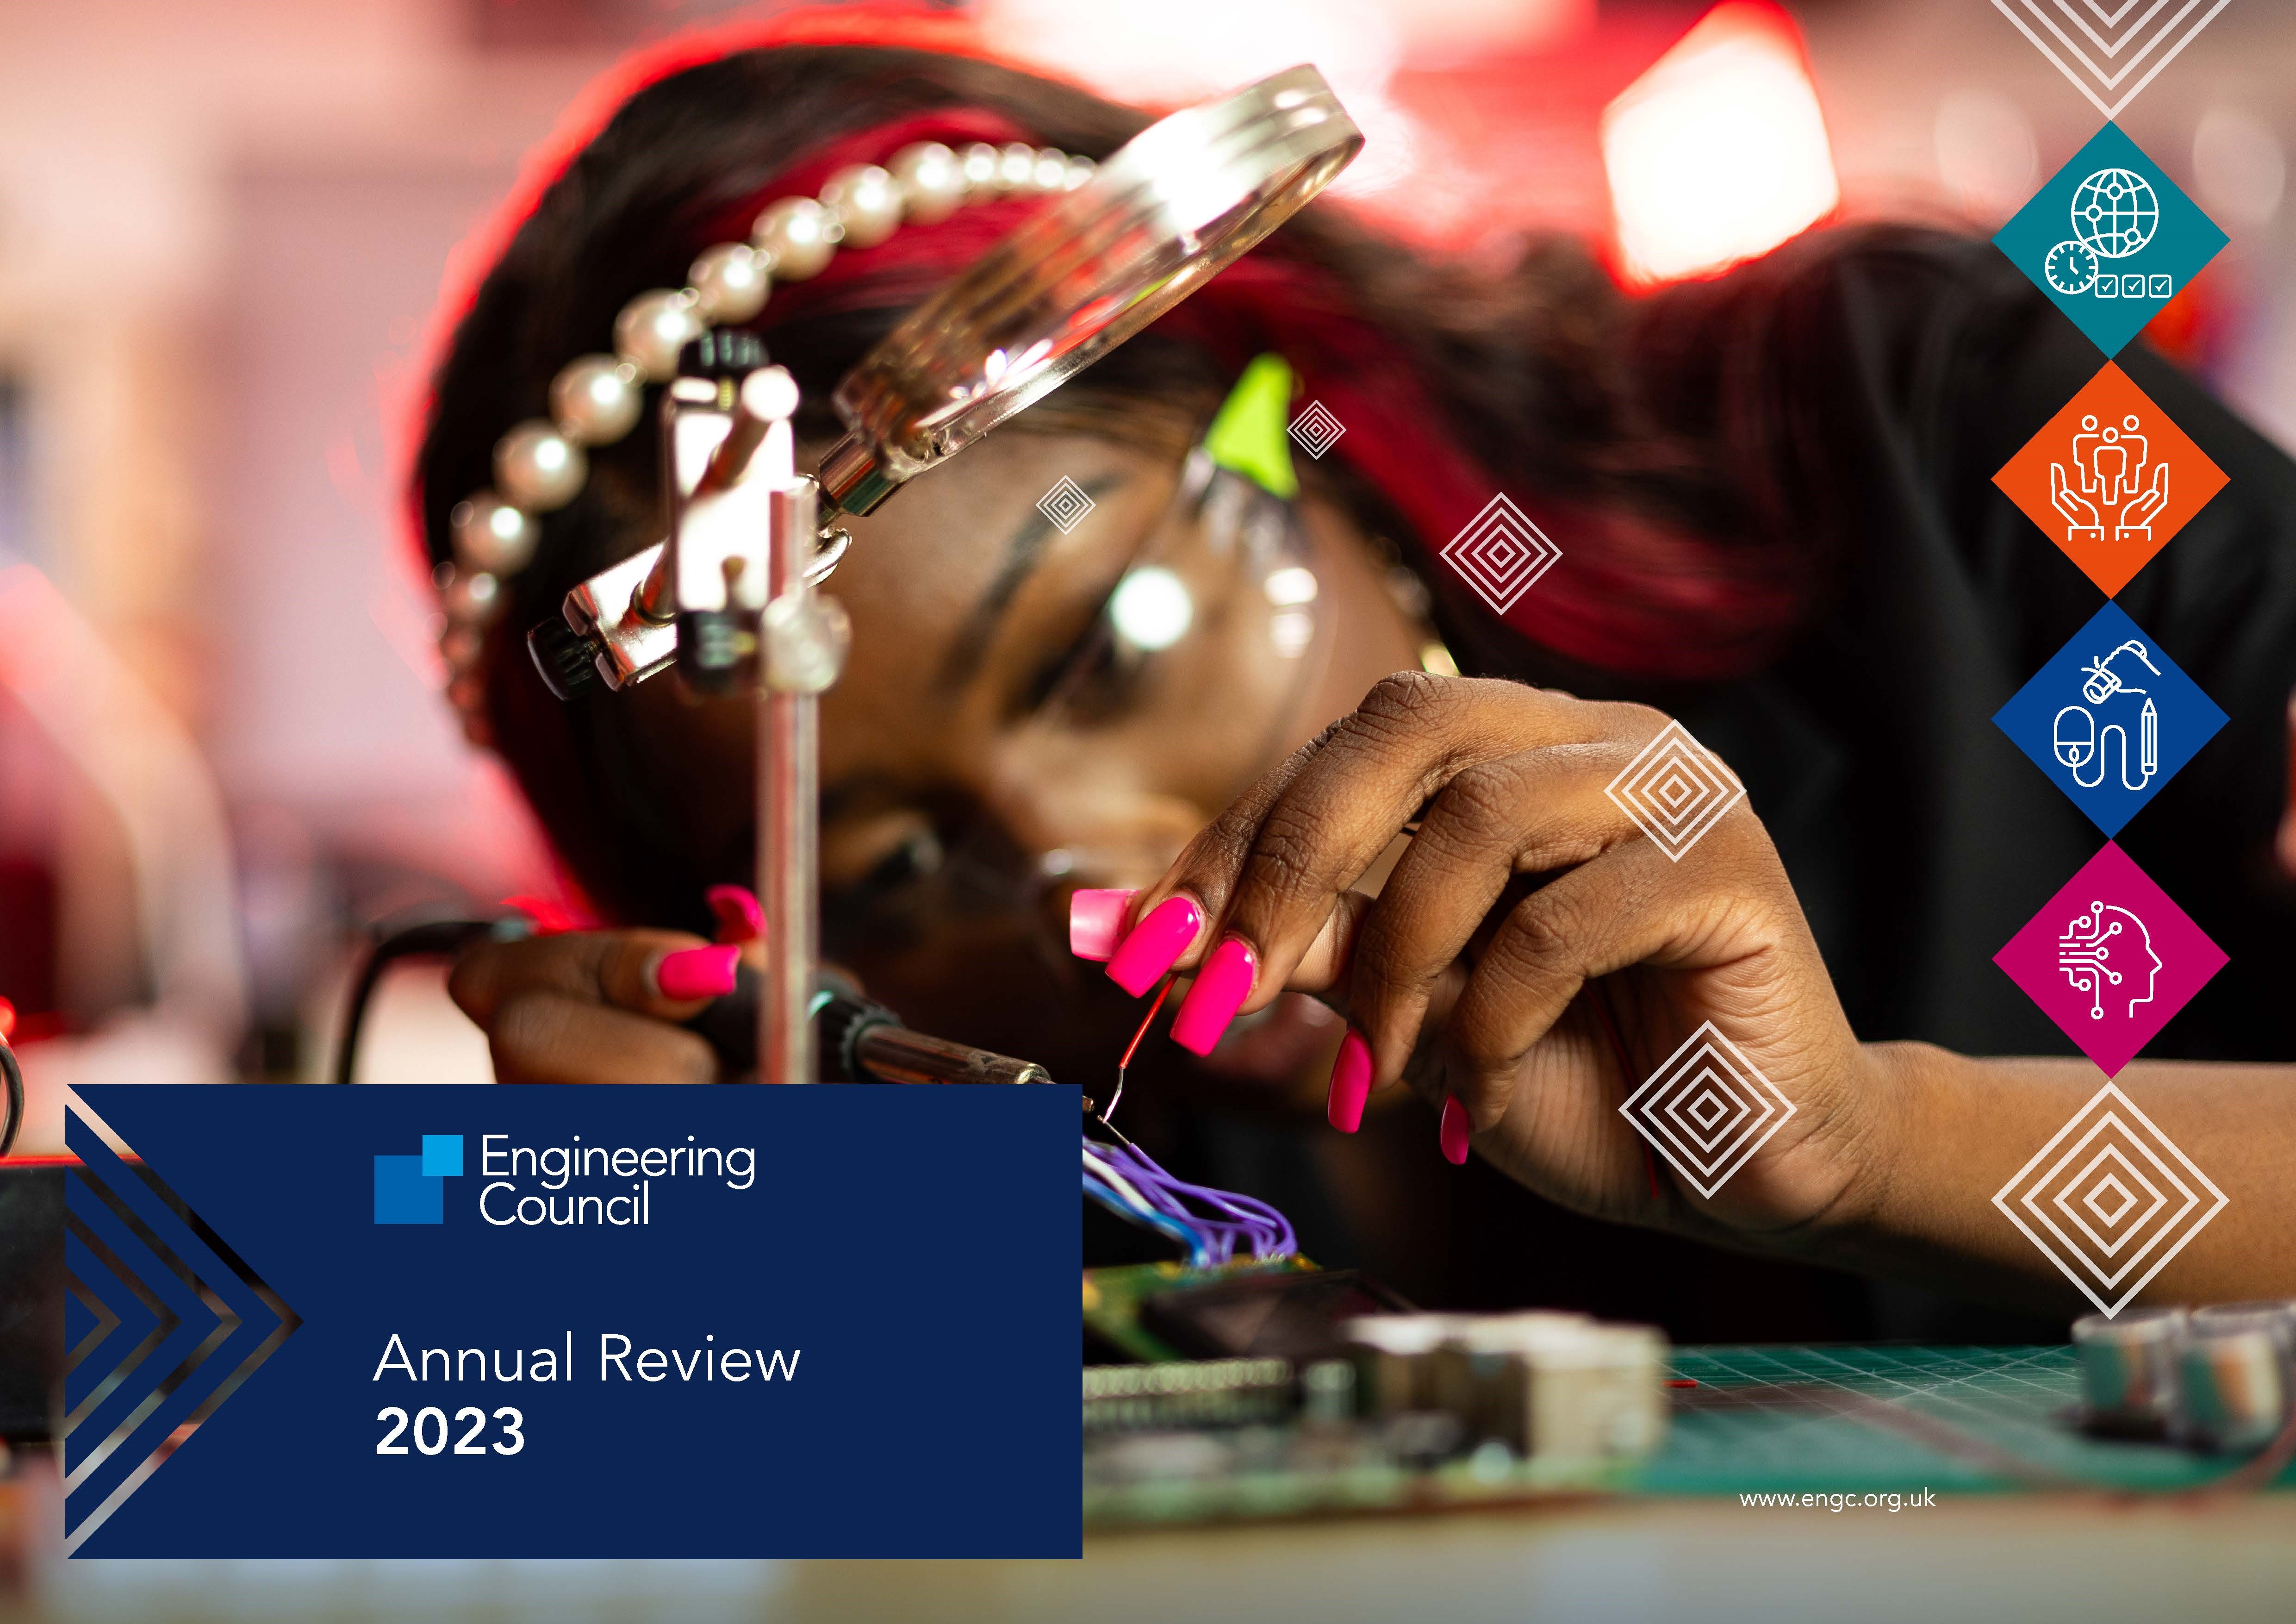 front cover of the Annual Review 2023 a female engineer with long pink fingernails, solders wires